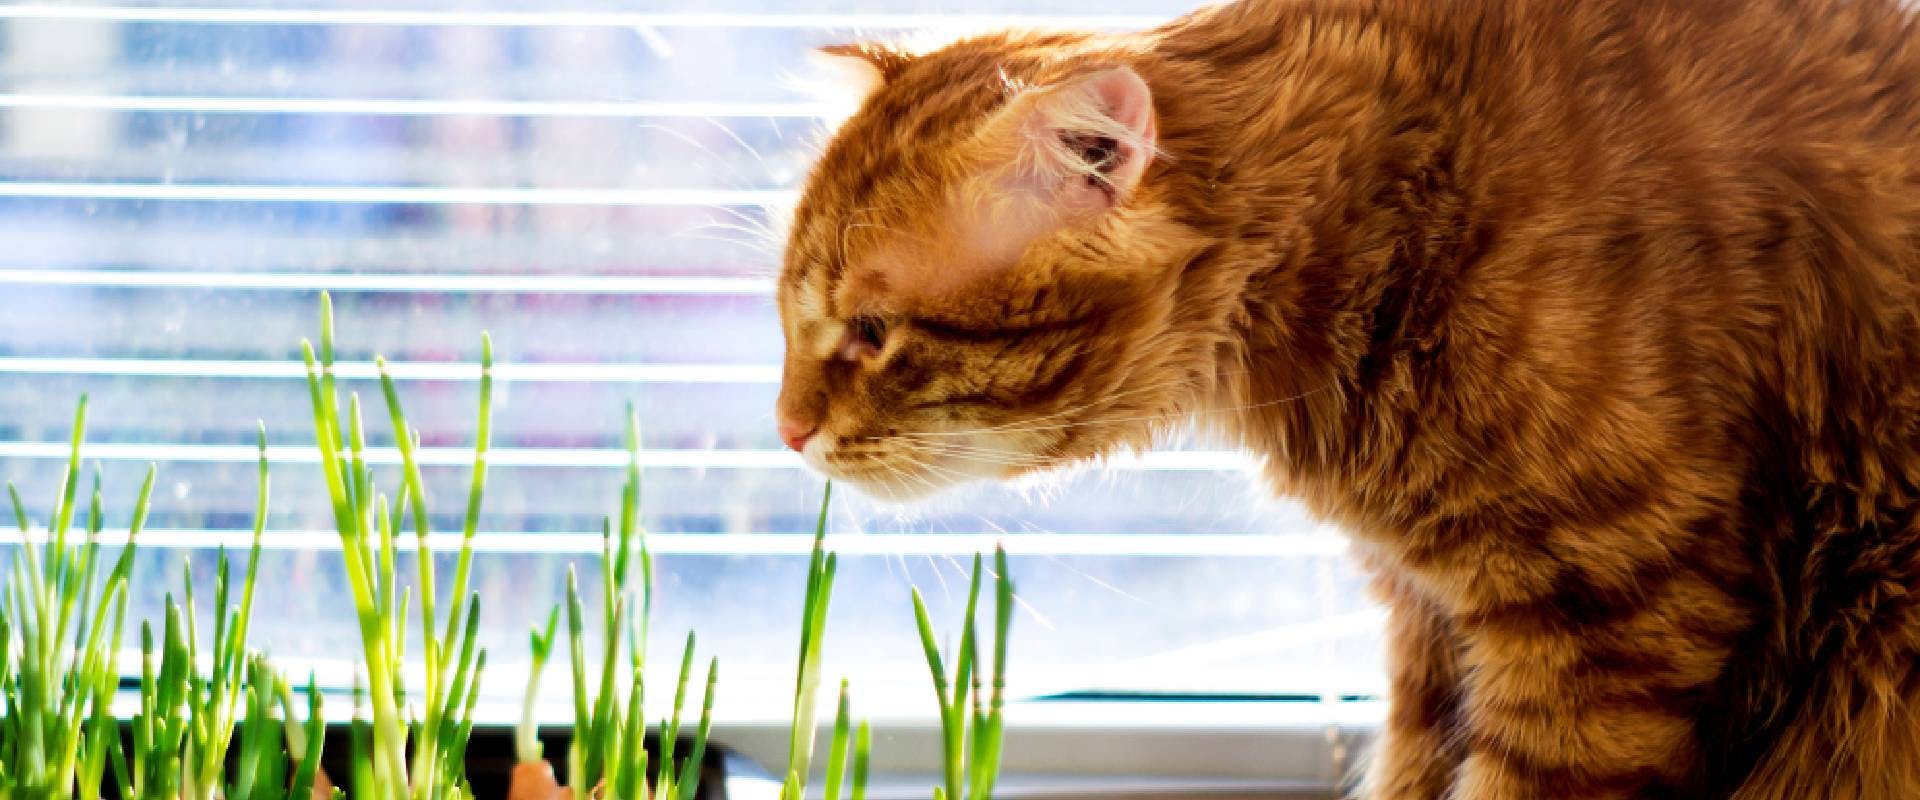 Red cat sniffing green onions